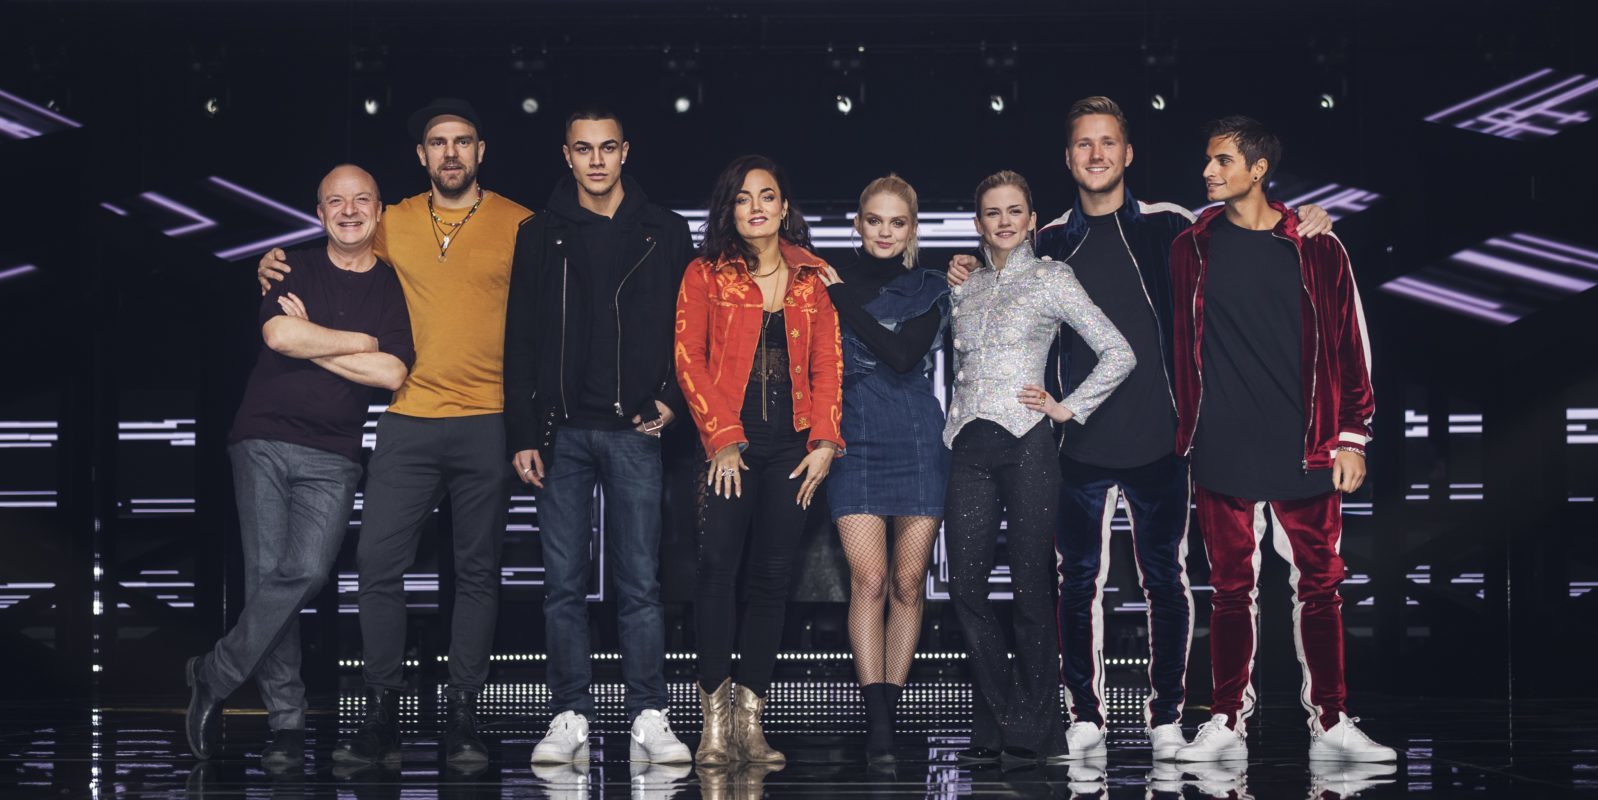 Tonight: Melodifestivalen 2018 continues in Sweden with Semi-Final 2